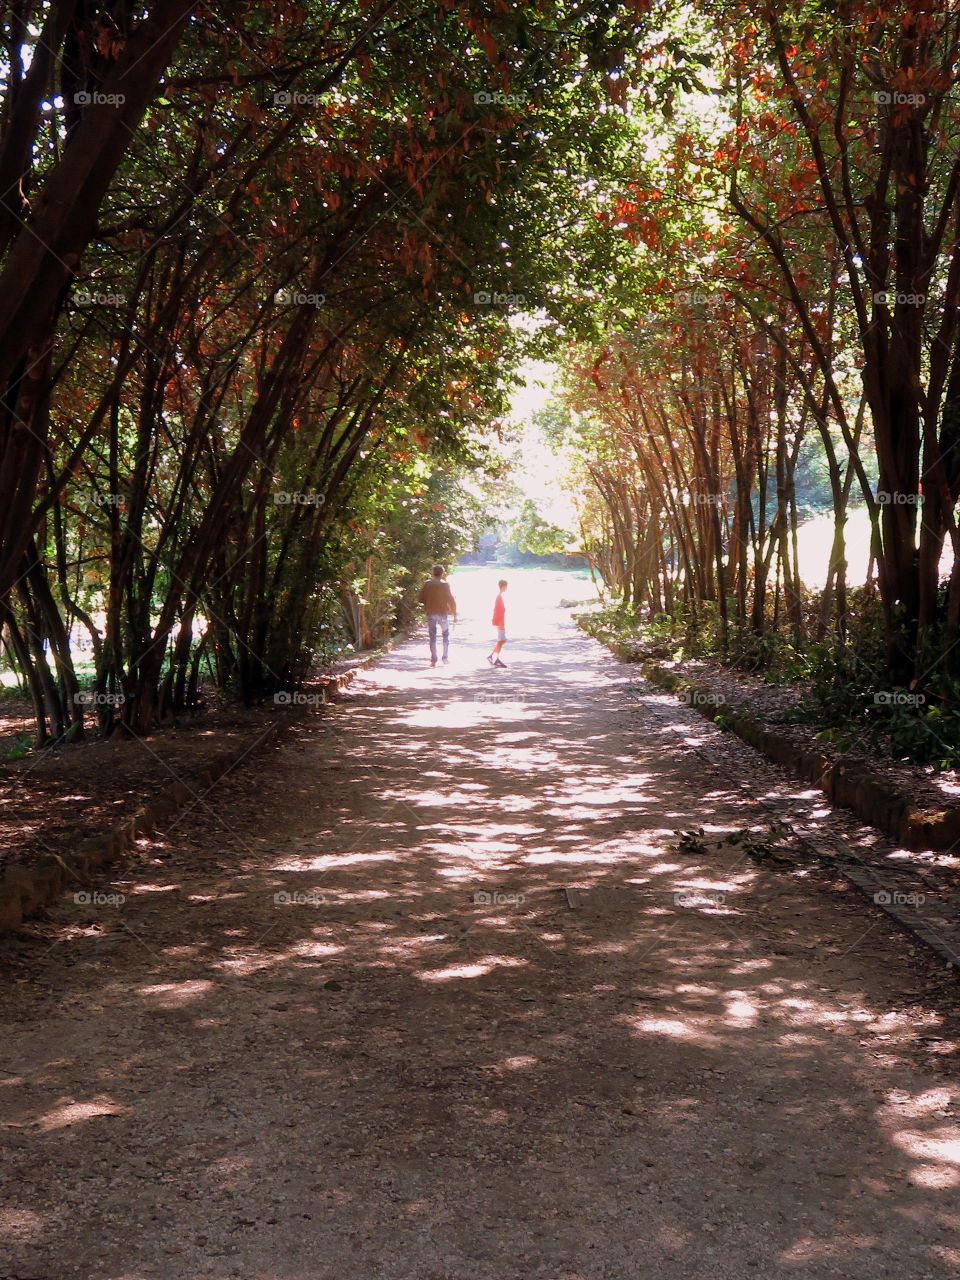 blurred people in a shady autumn pathway